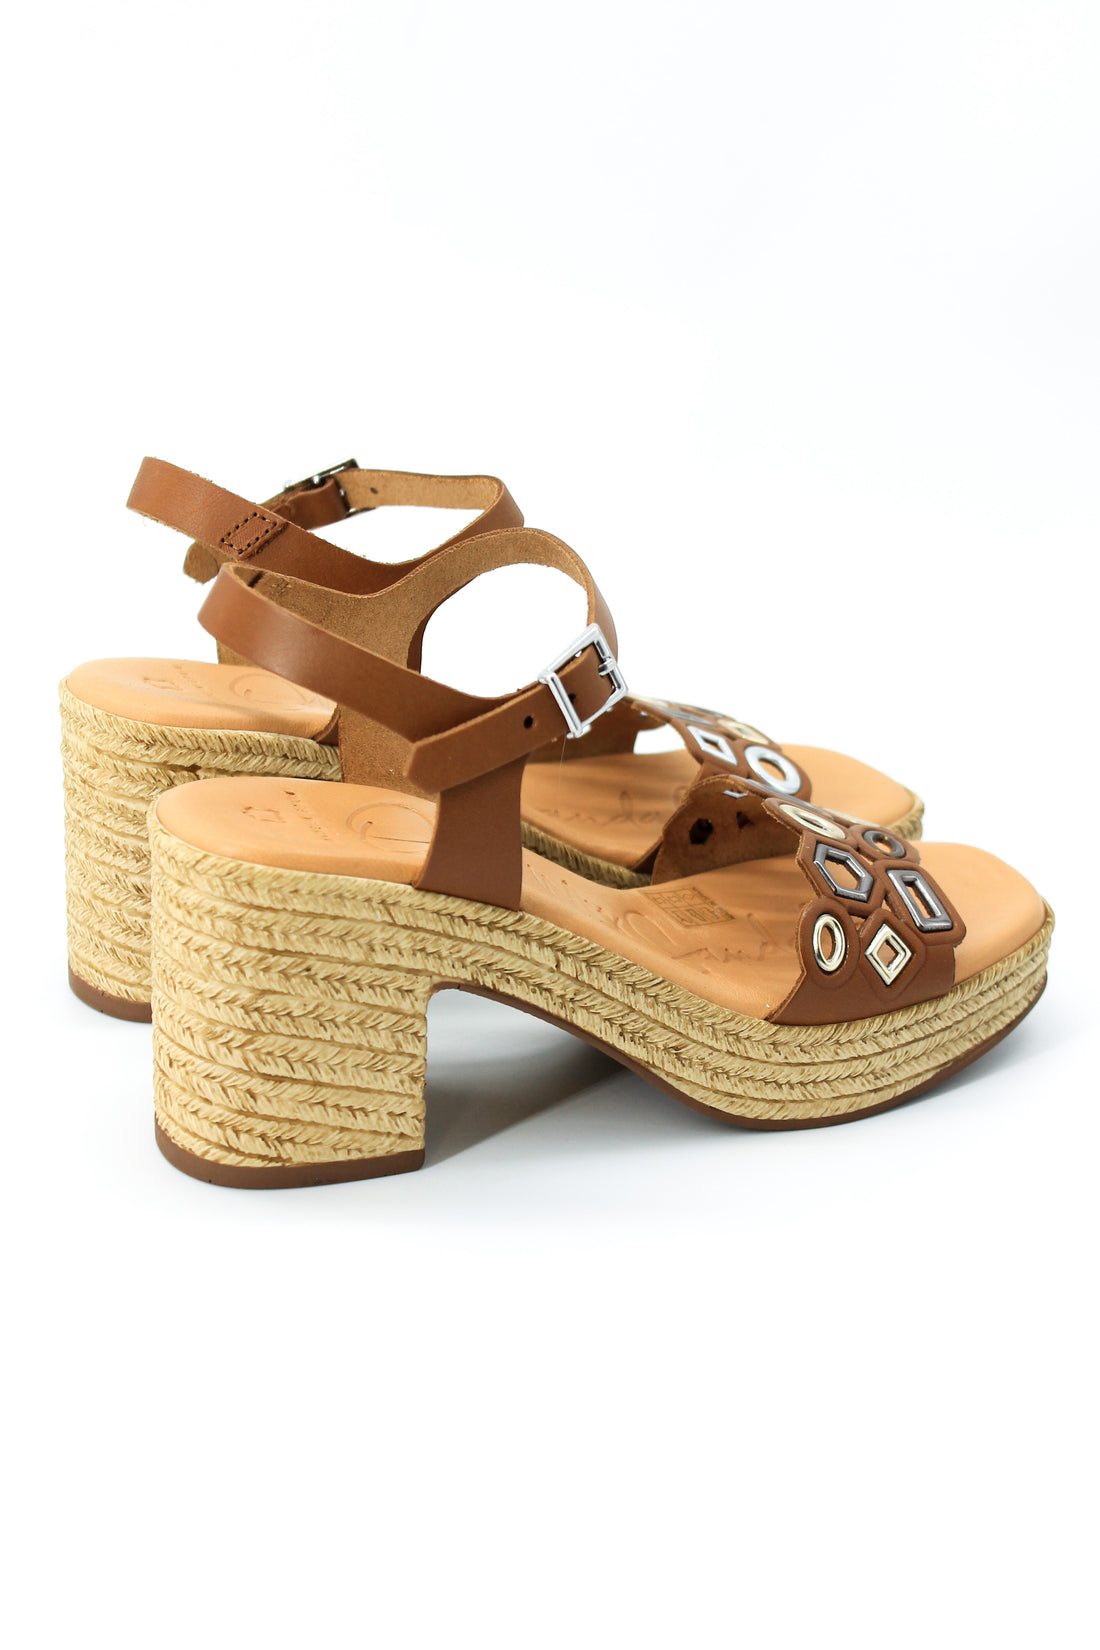 Oh My Sandals 5232 Tan